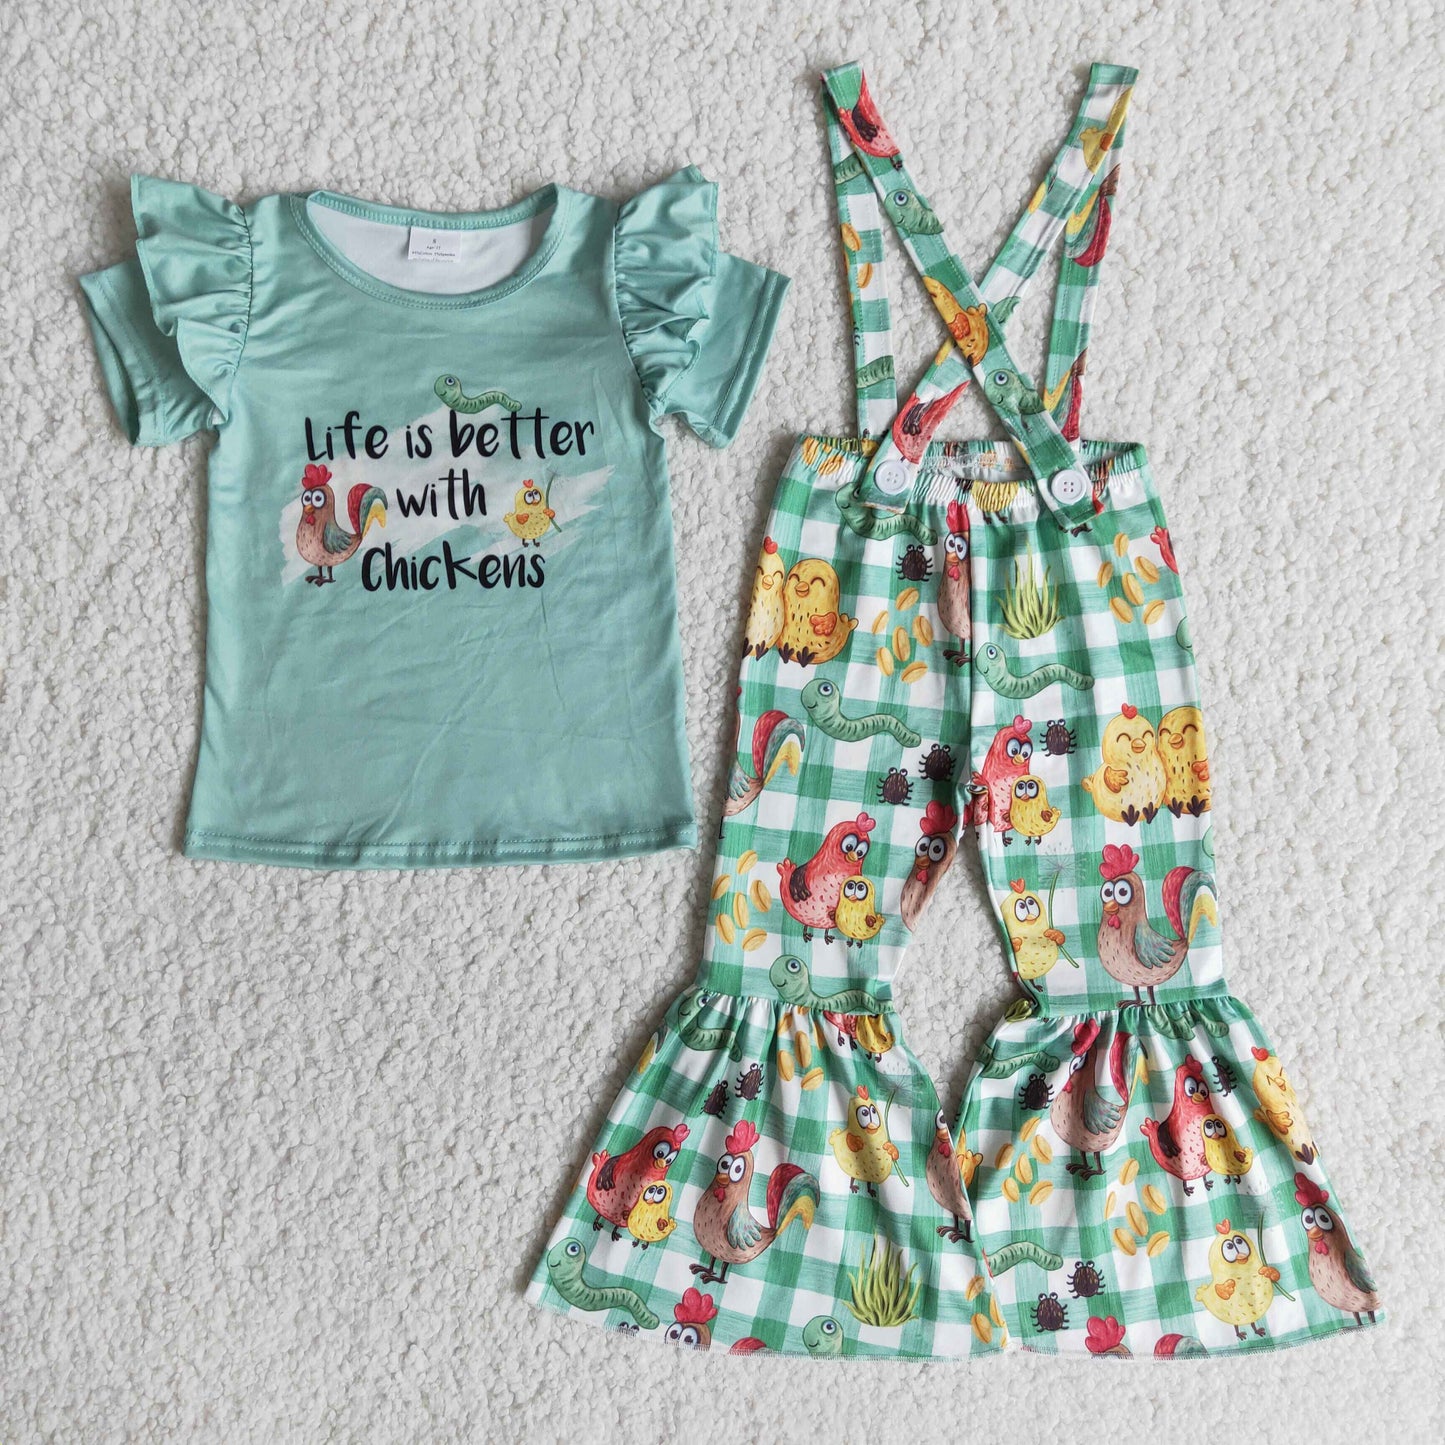 Life is better with chickens shirt overalls cute girls clothing set